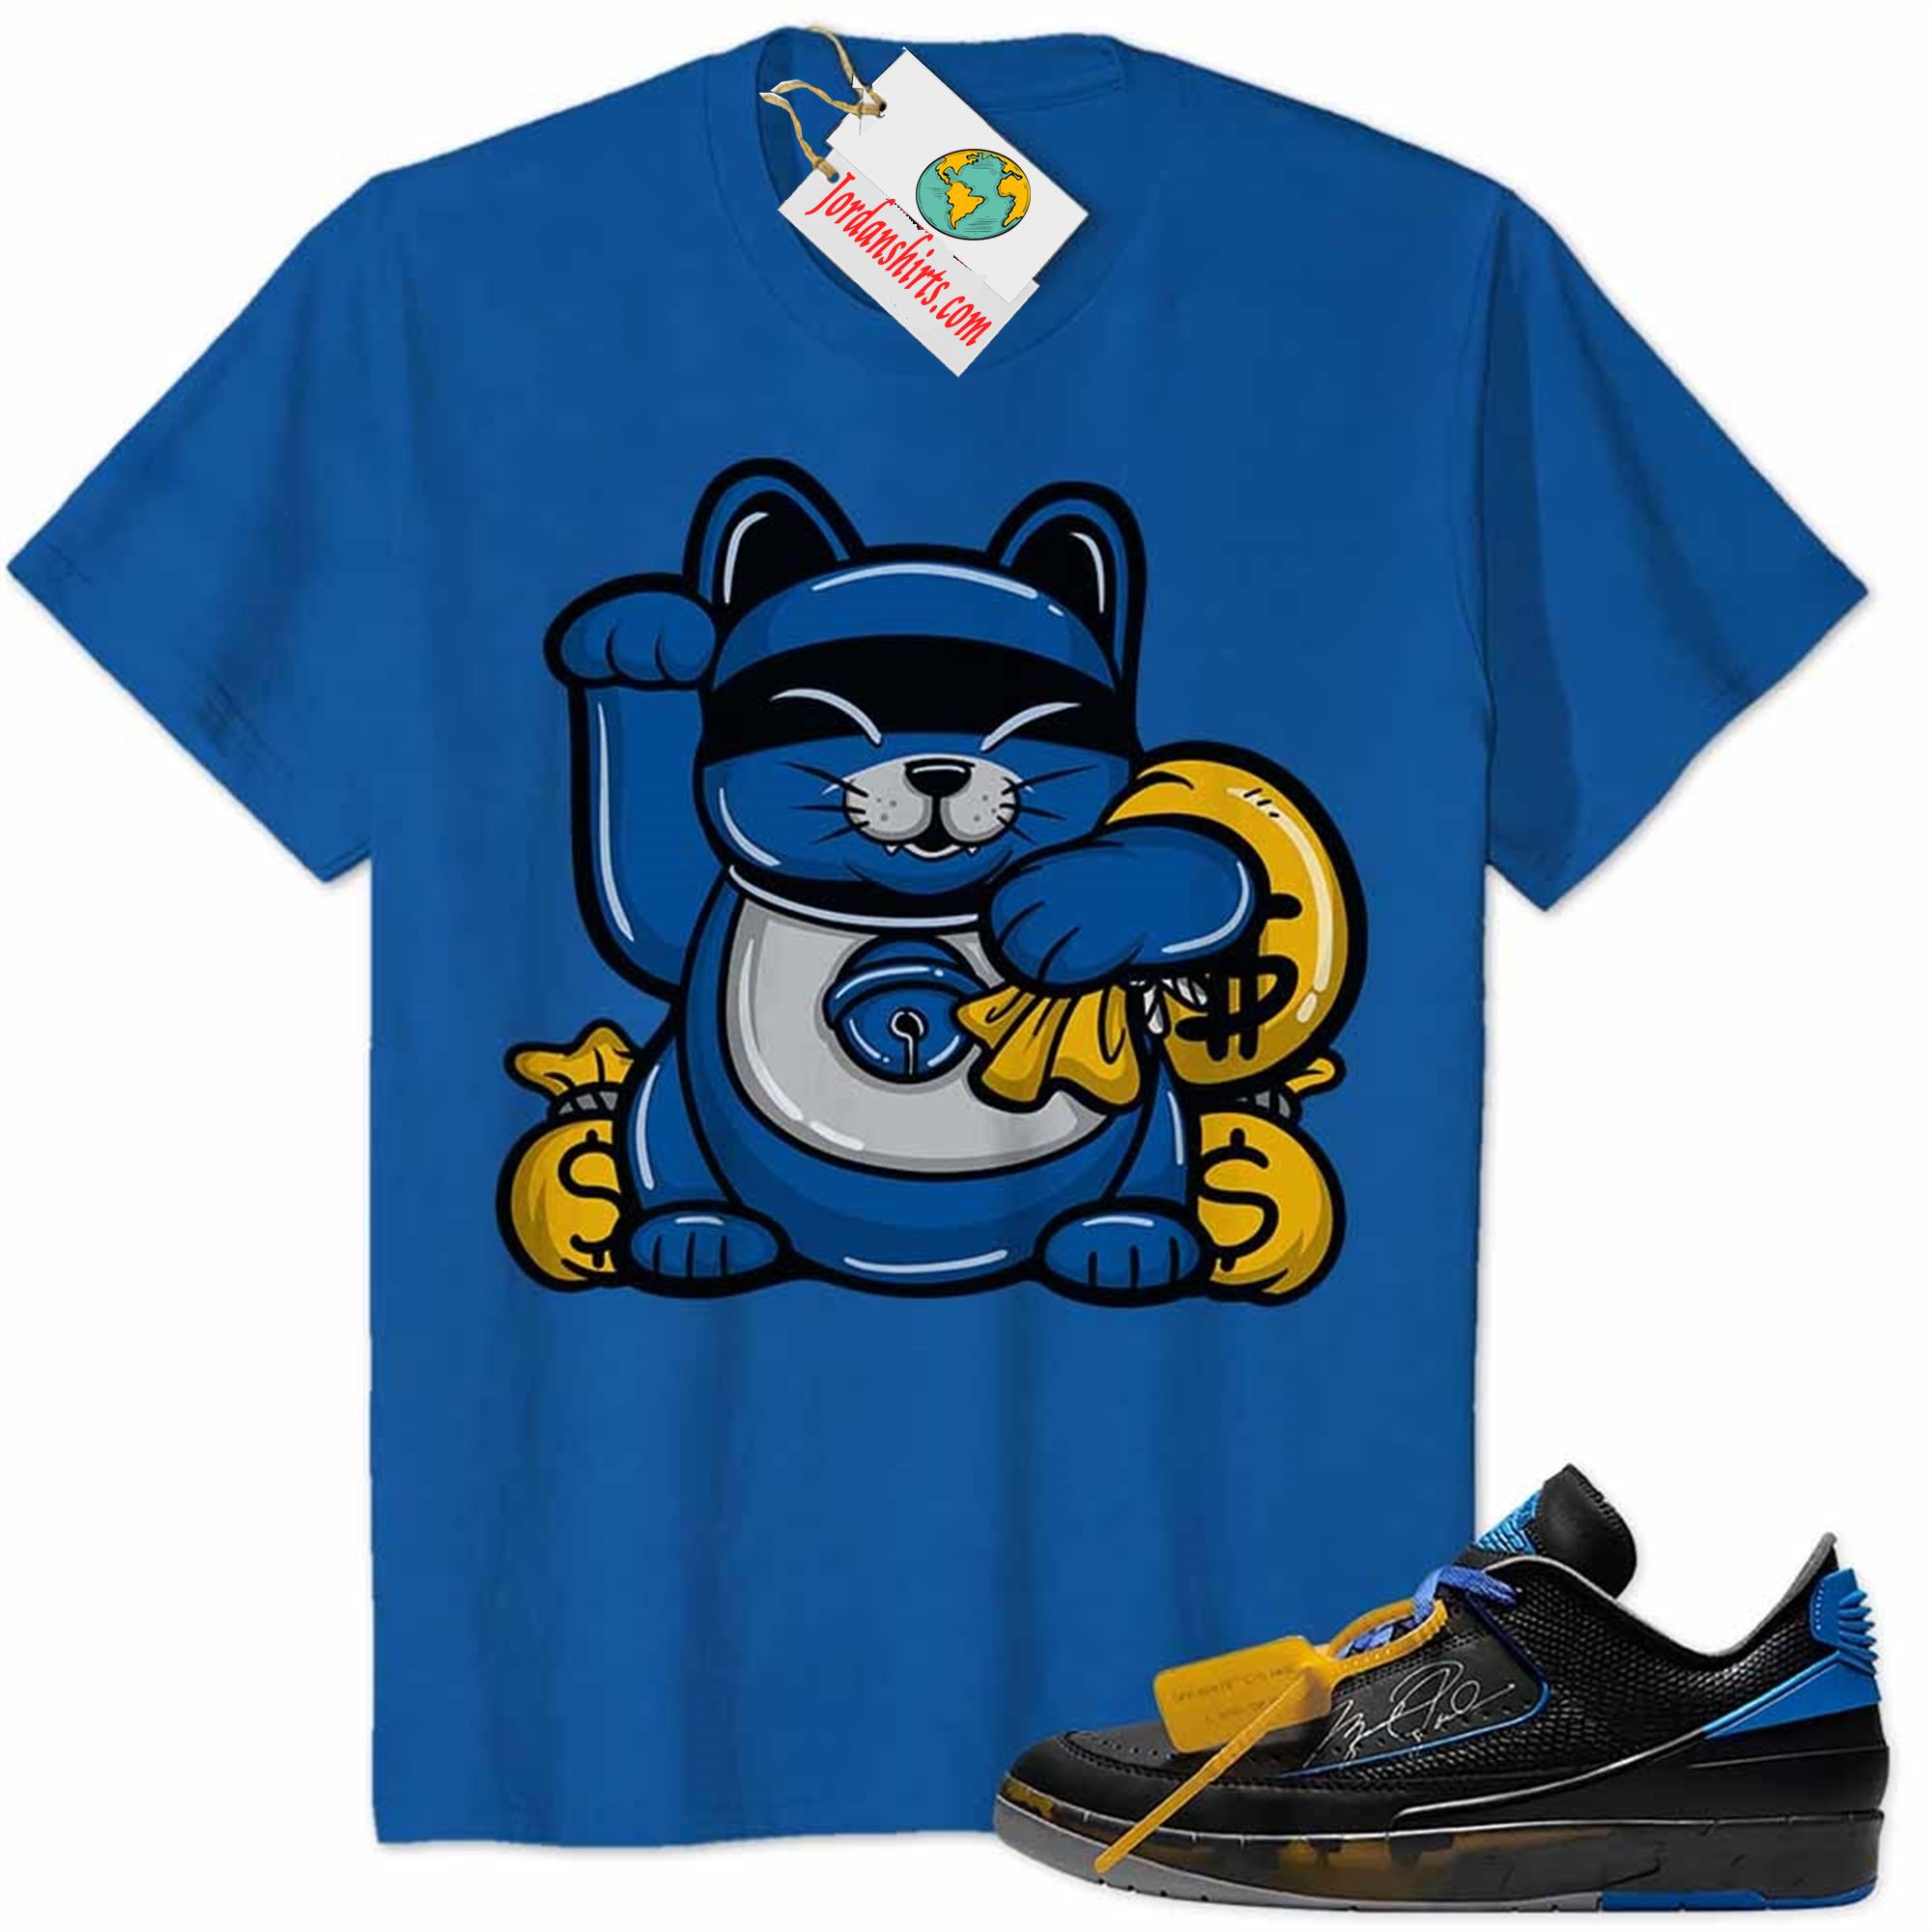 Jordan 2 Shirt, Lucky Cat Gangster With Money Bag Blue Air Jordan 2 Low X Off-white Black And Varsity Royal 2s Size Up To 5xl